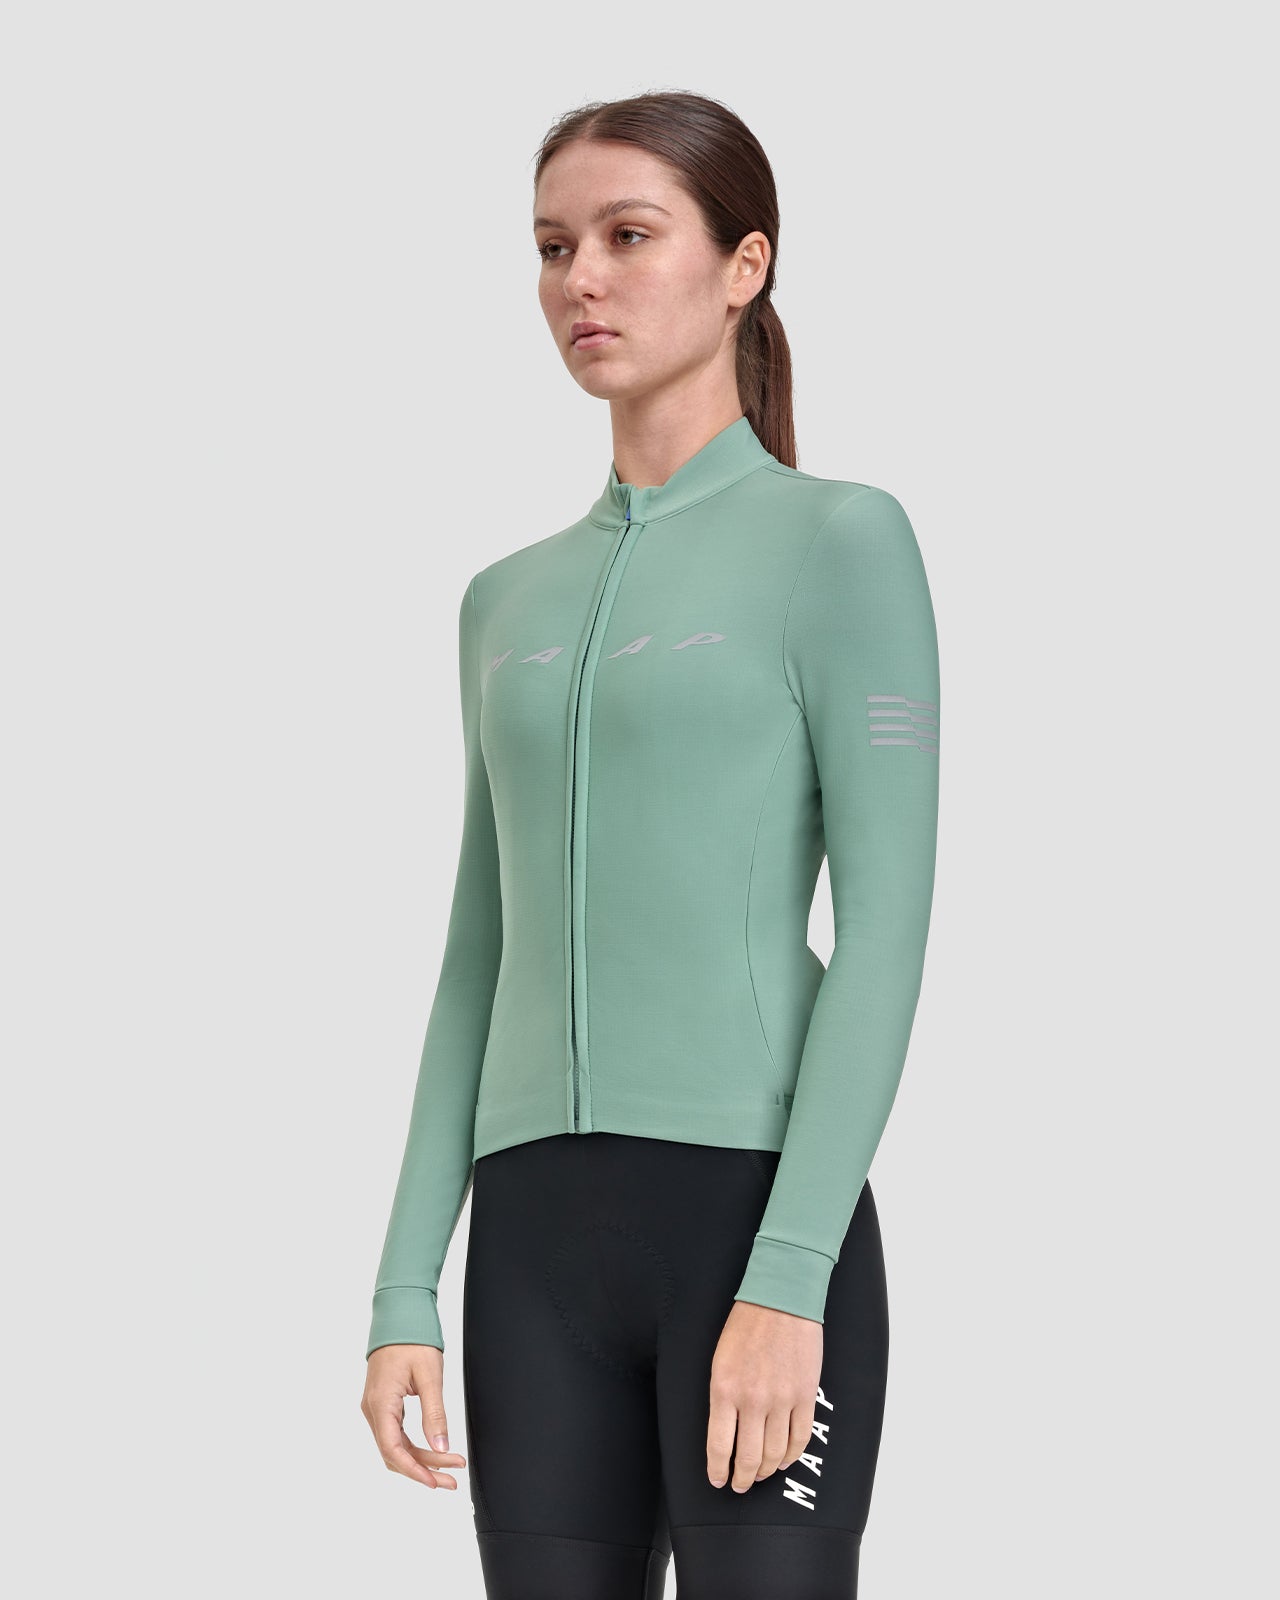 Women's Evade Thermal LS Jersey 2.0 - MAAP Cycling Apparel